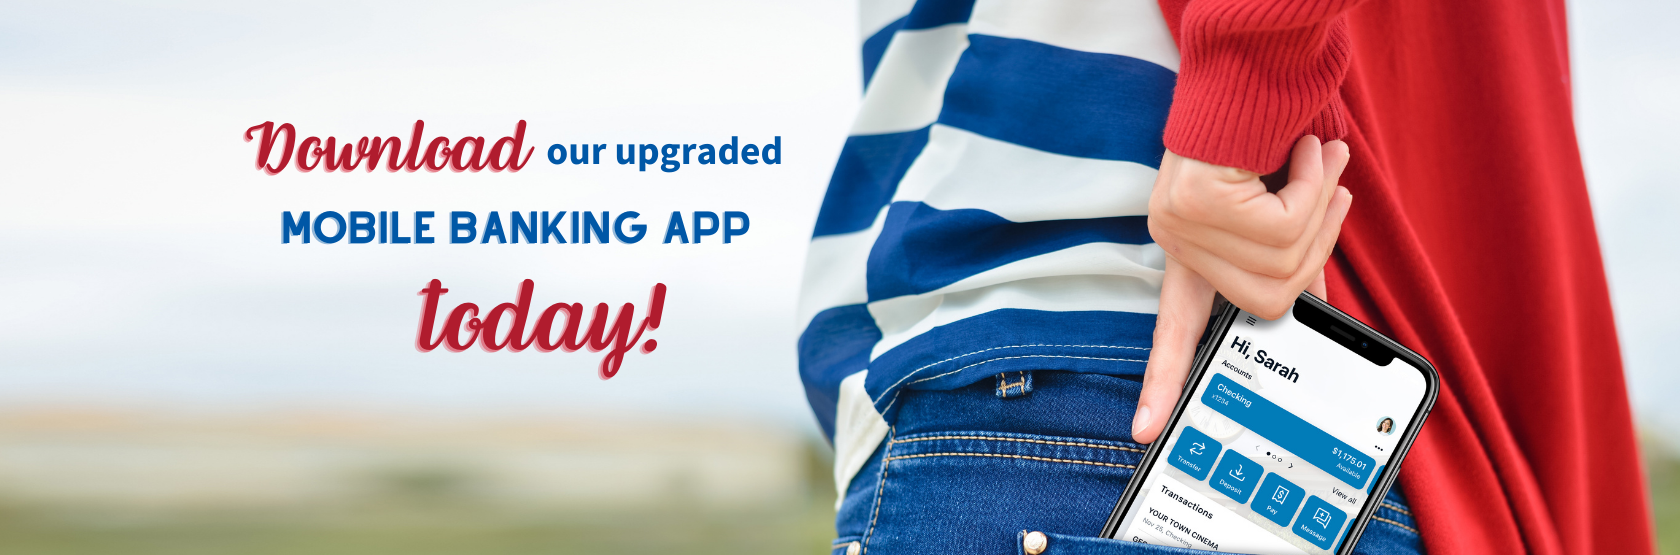 Download our upgraded mobile banking app today!